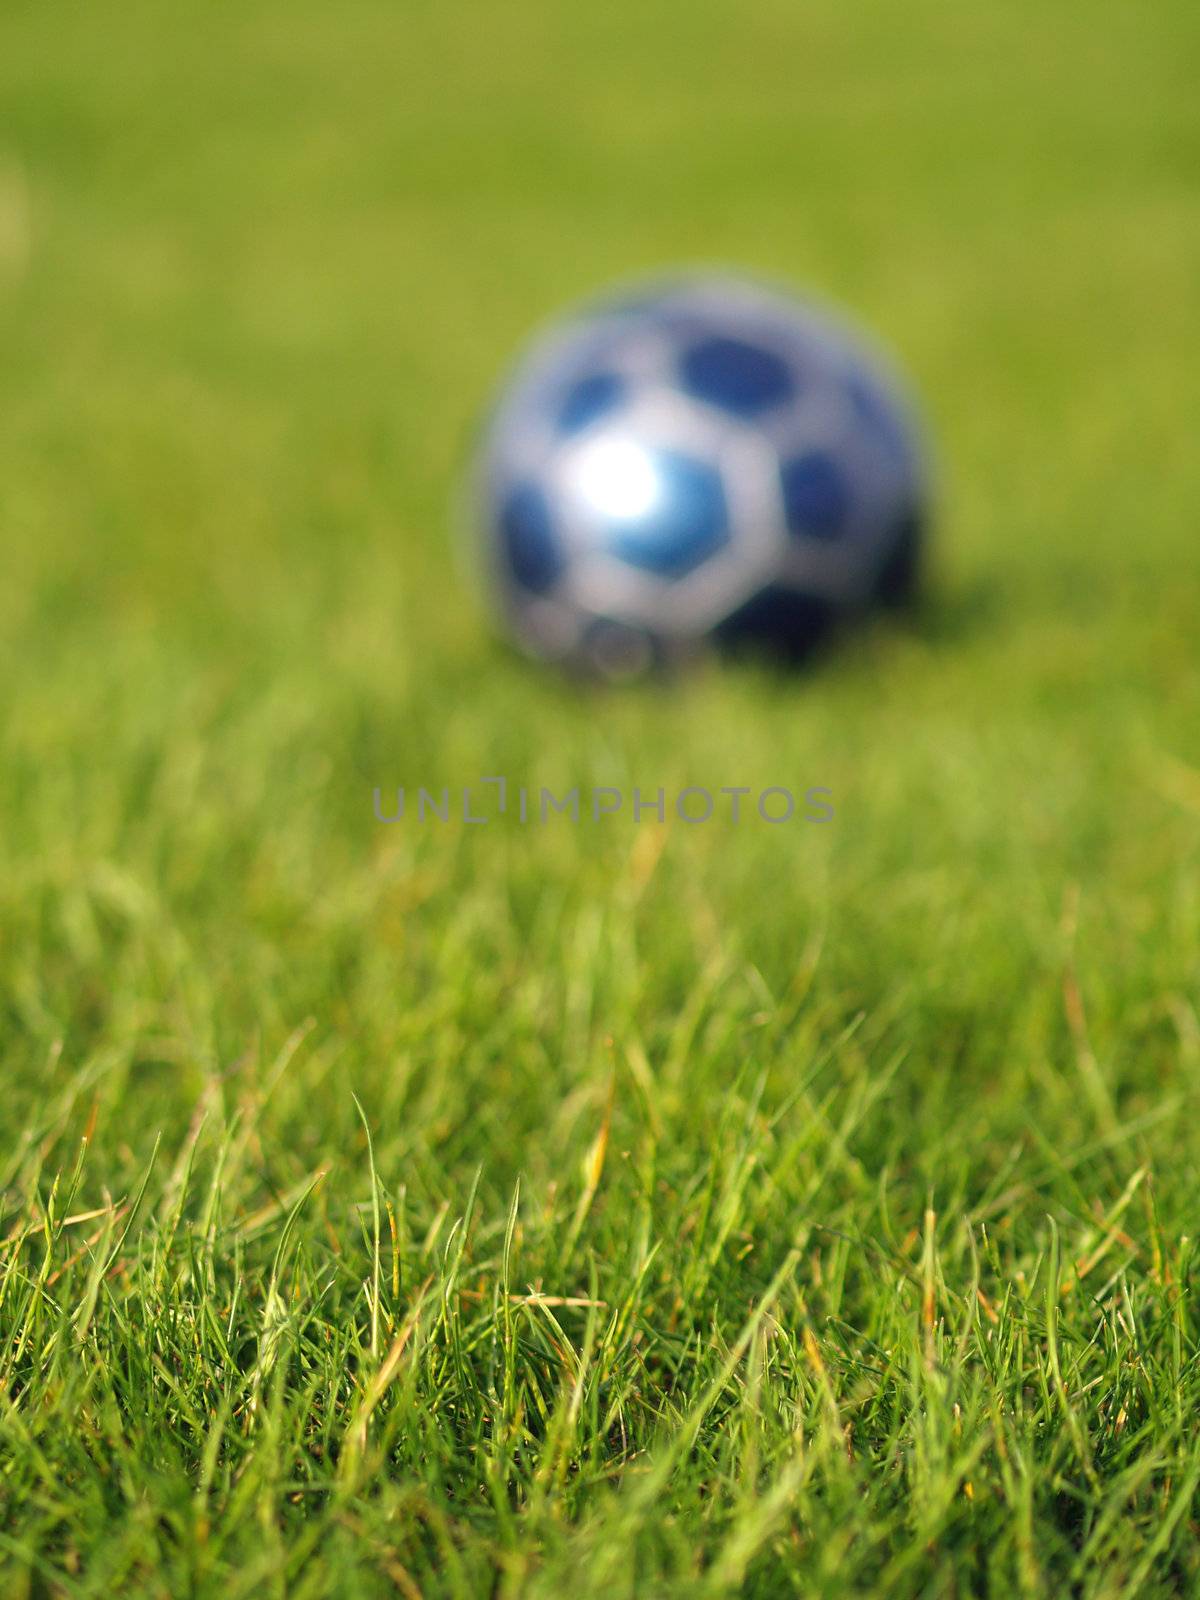 A blue soccer ball on a field of green grass on a bright, sunny day